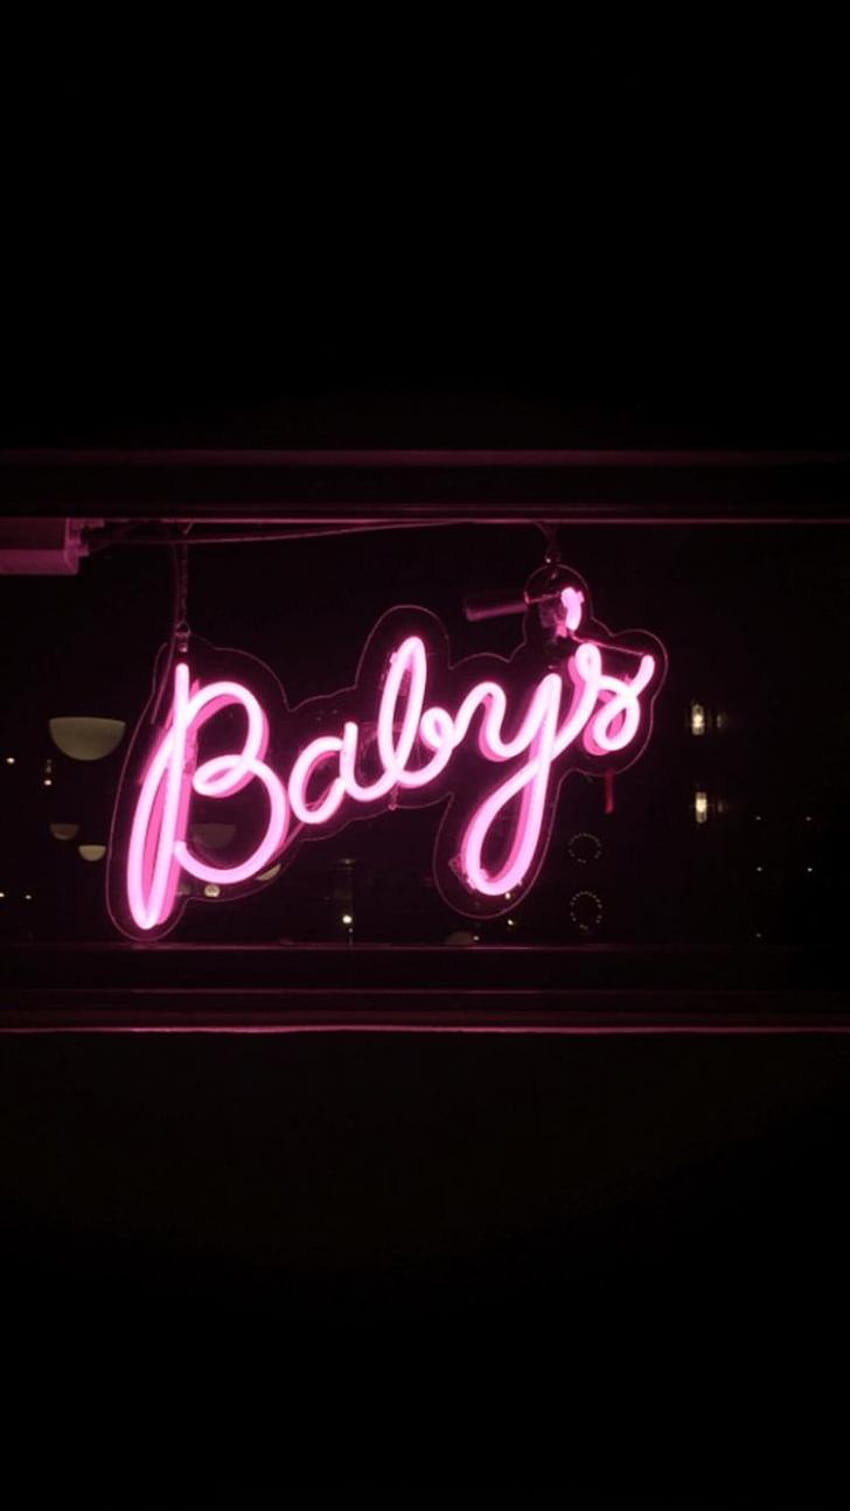 A neon sign in pink that says Babys - Neon pink